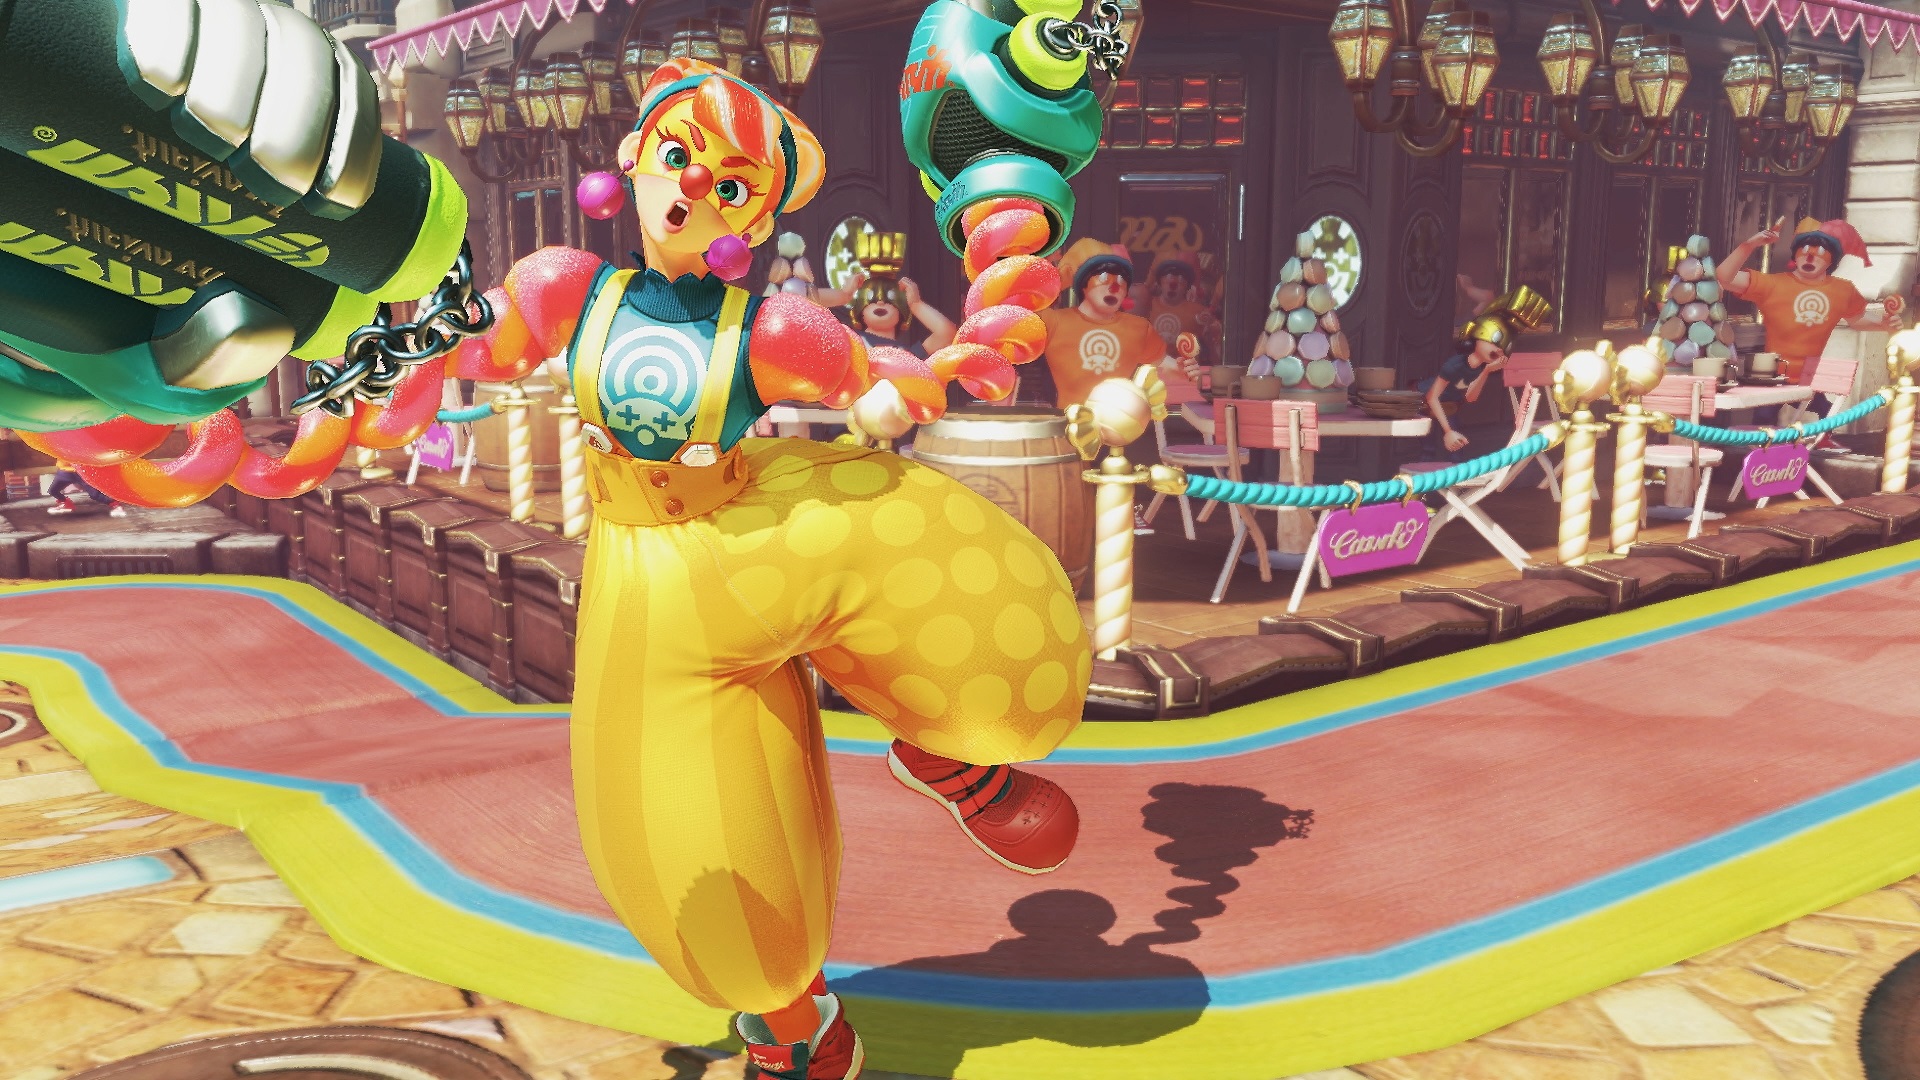 Arms Update 3.0 Now Available, Adds Lola, Tweaks, and More